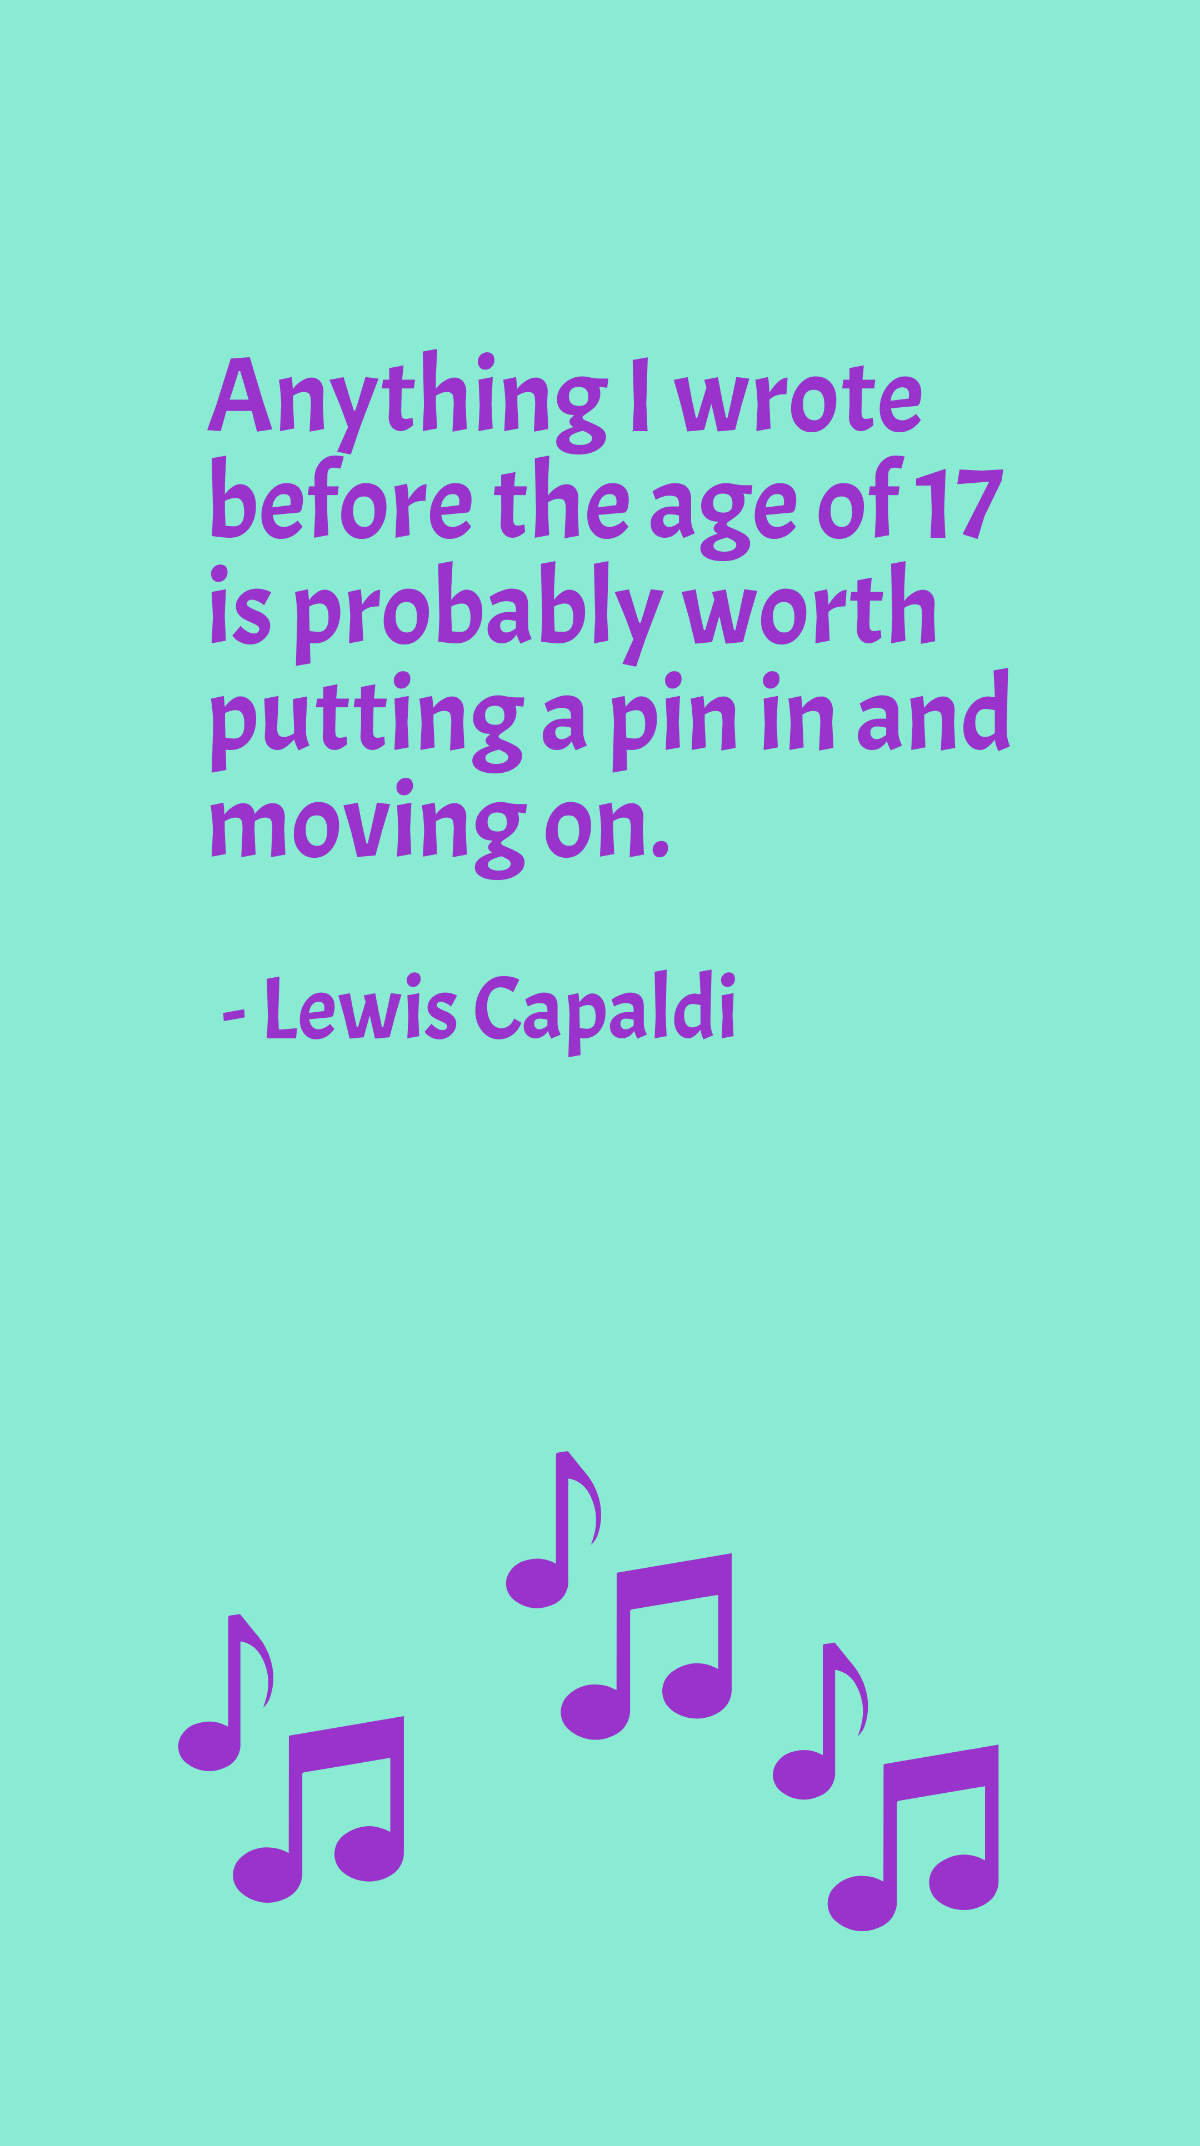 Lewis Capaldi - Anything I wrote before the age of 17 is probably worth putting a pin in and moving on. Template